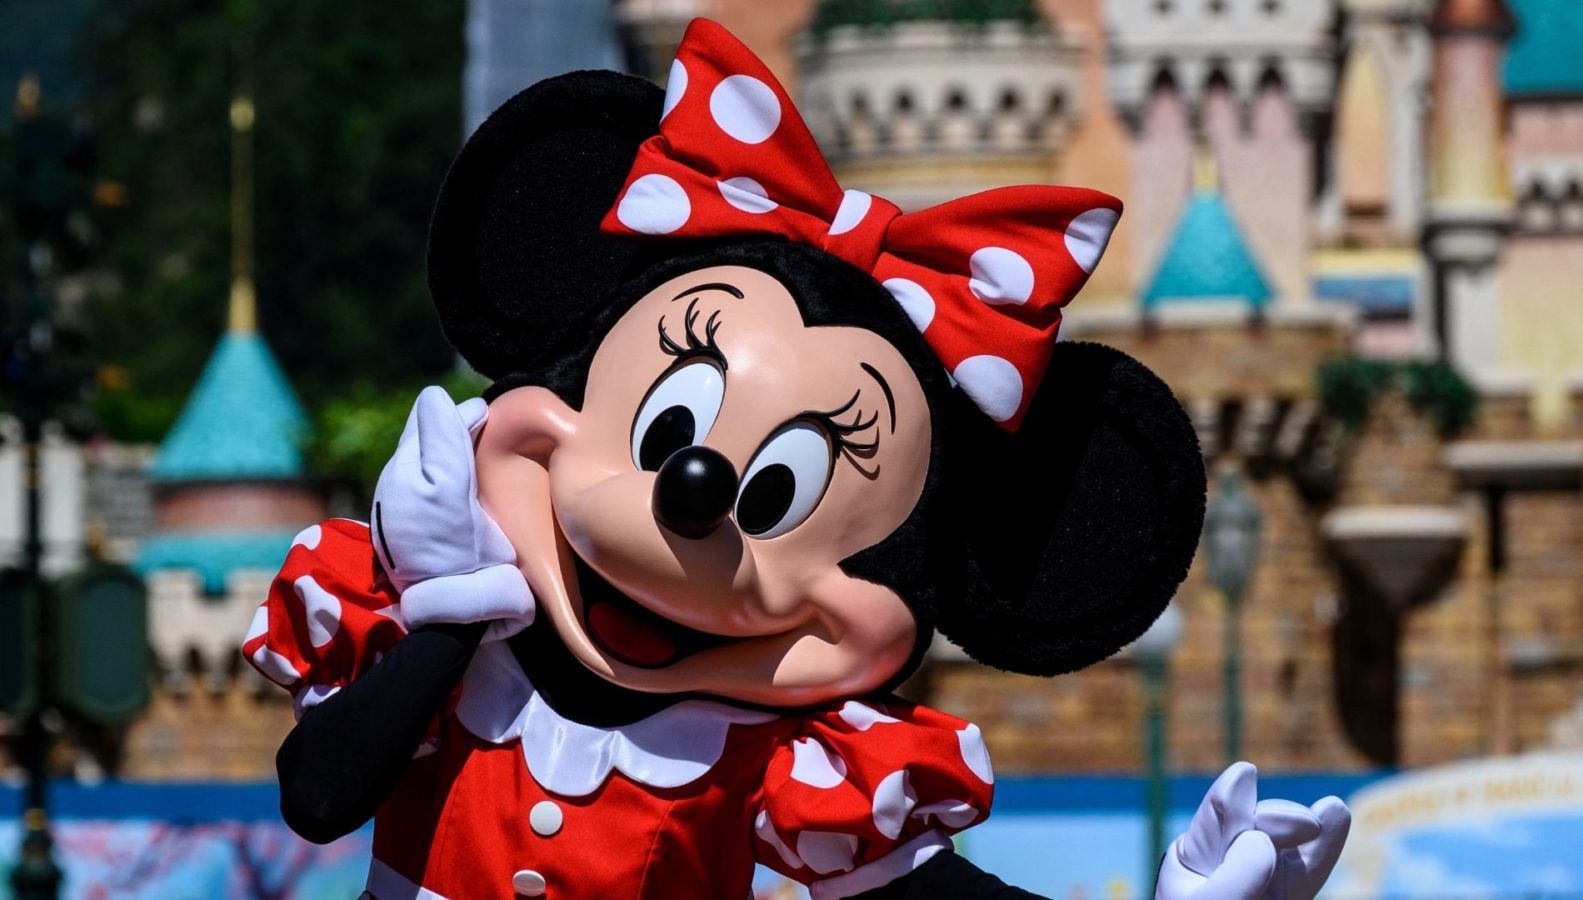 Minnie Mouse is getting a new pantsuit look designed by Stella McCartney